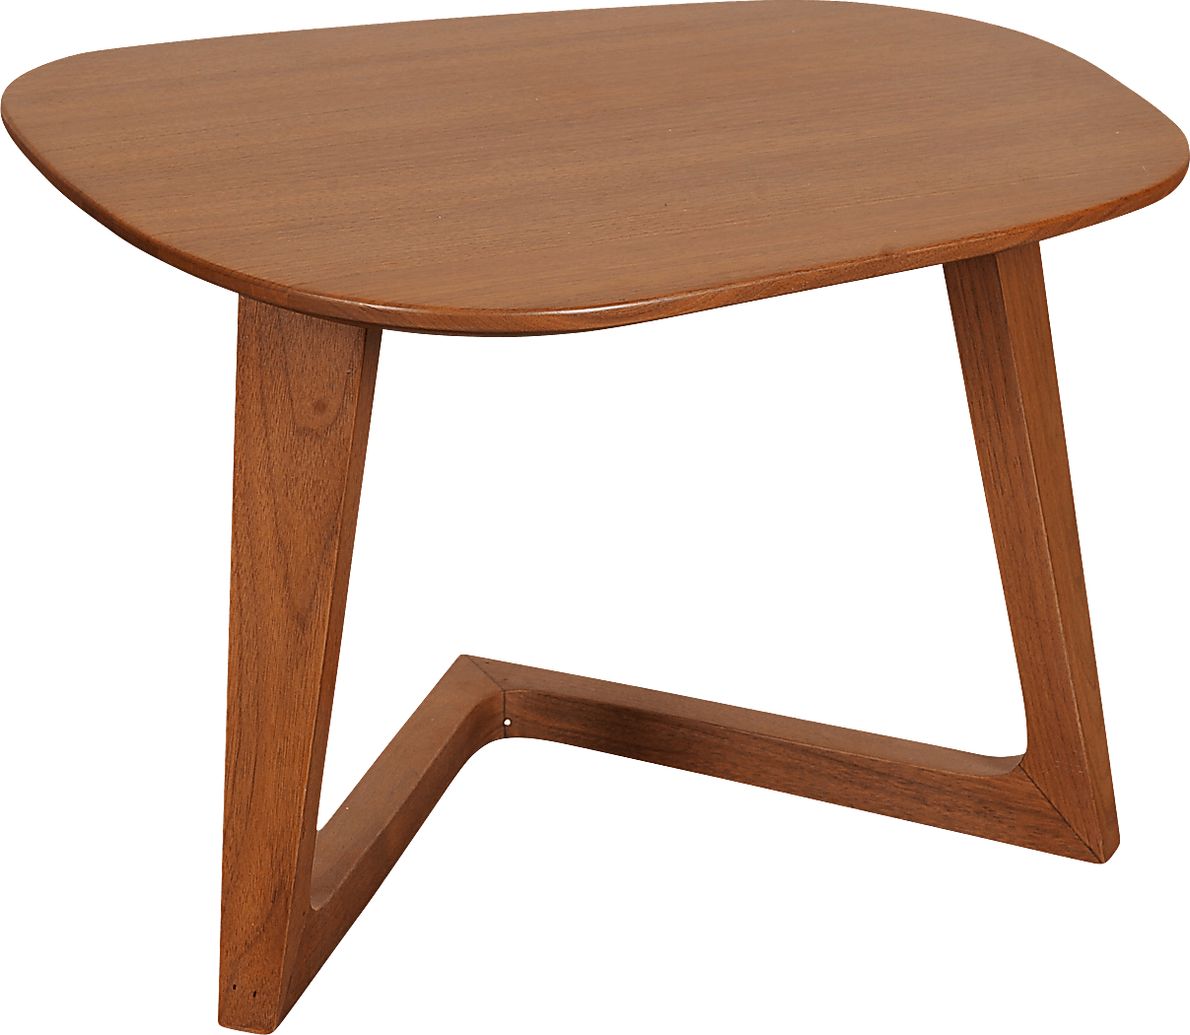 Maricopa Brown Side Table